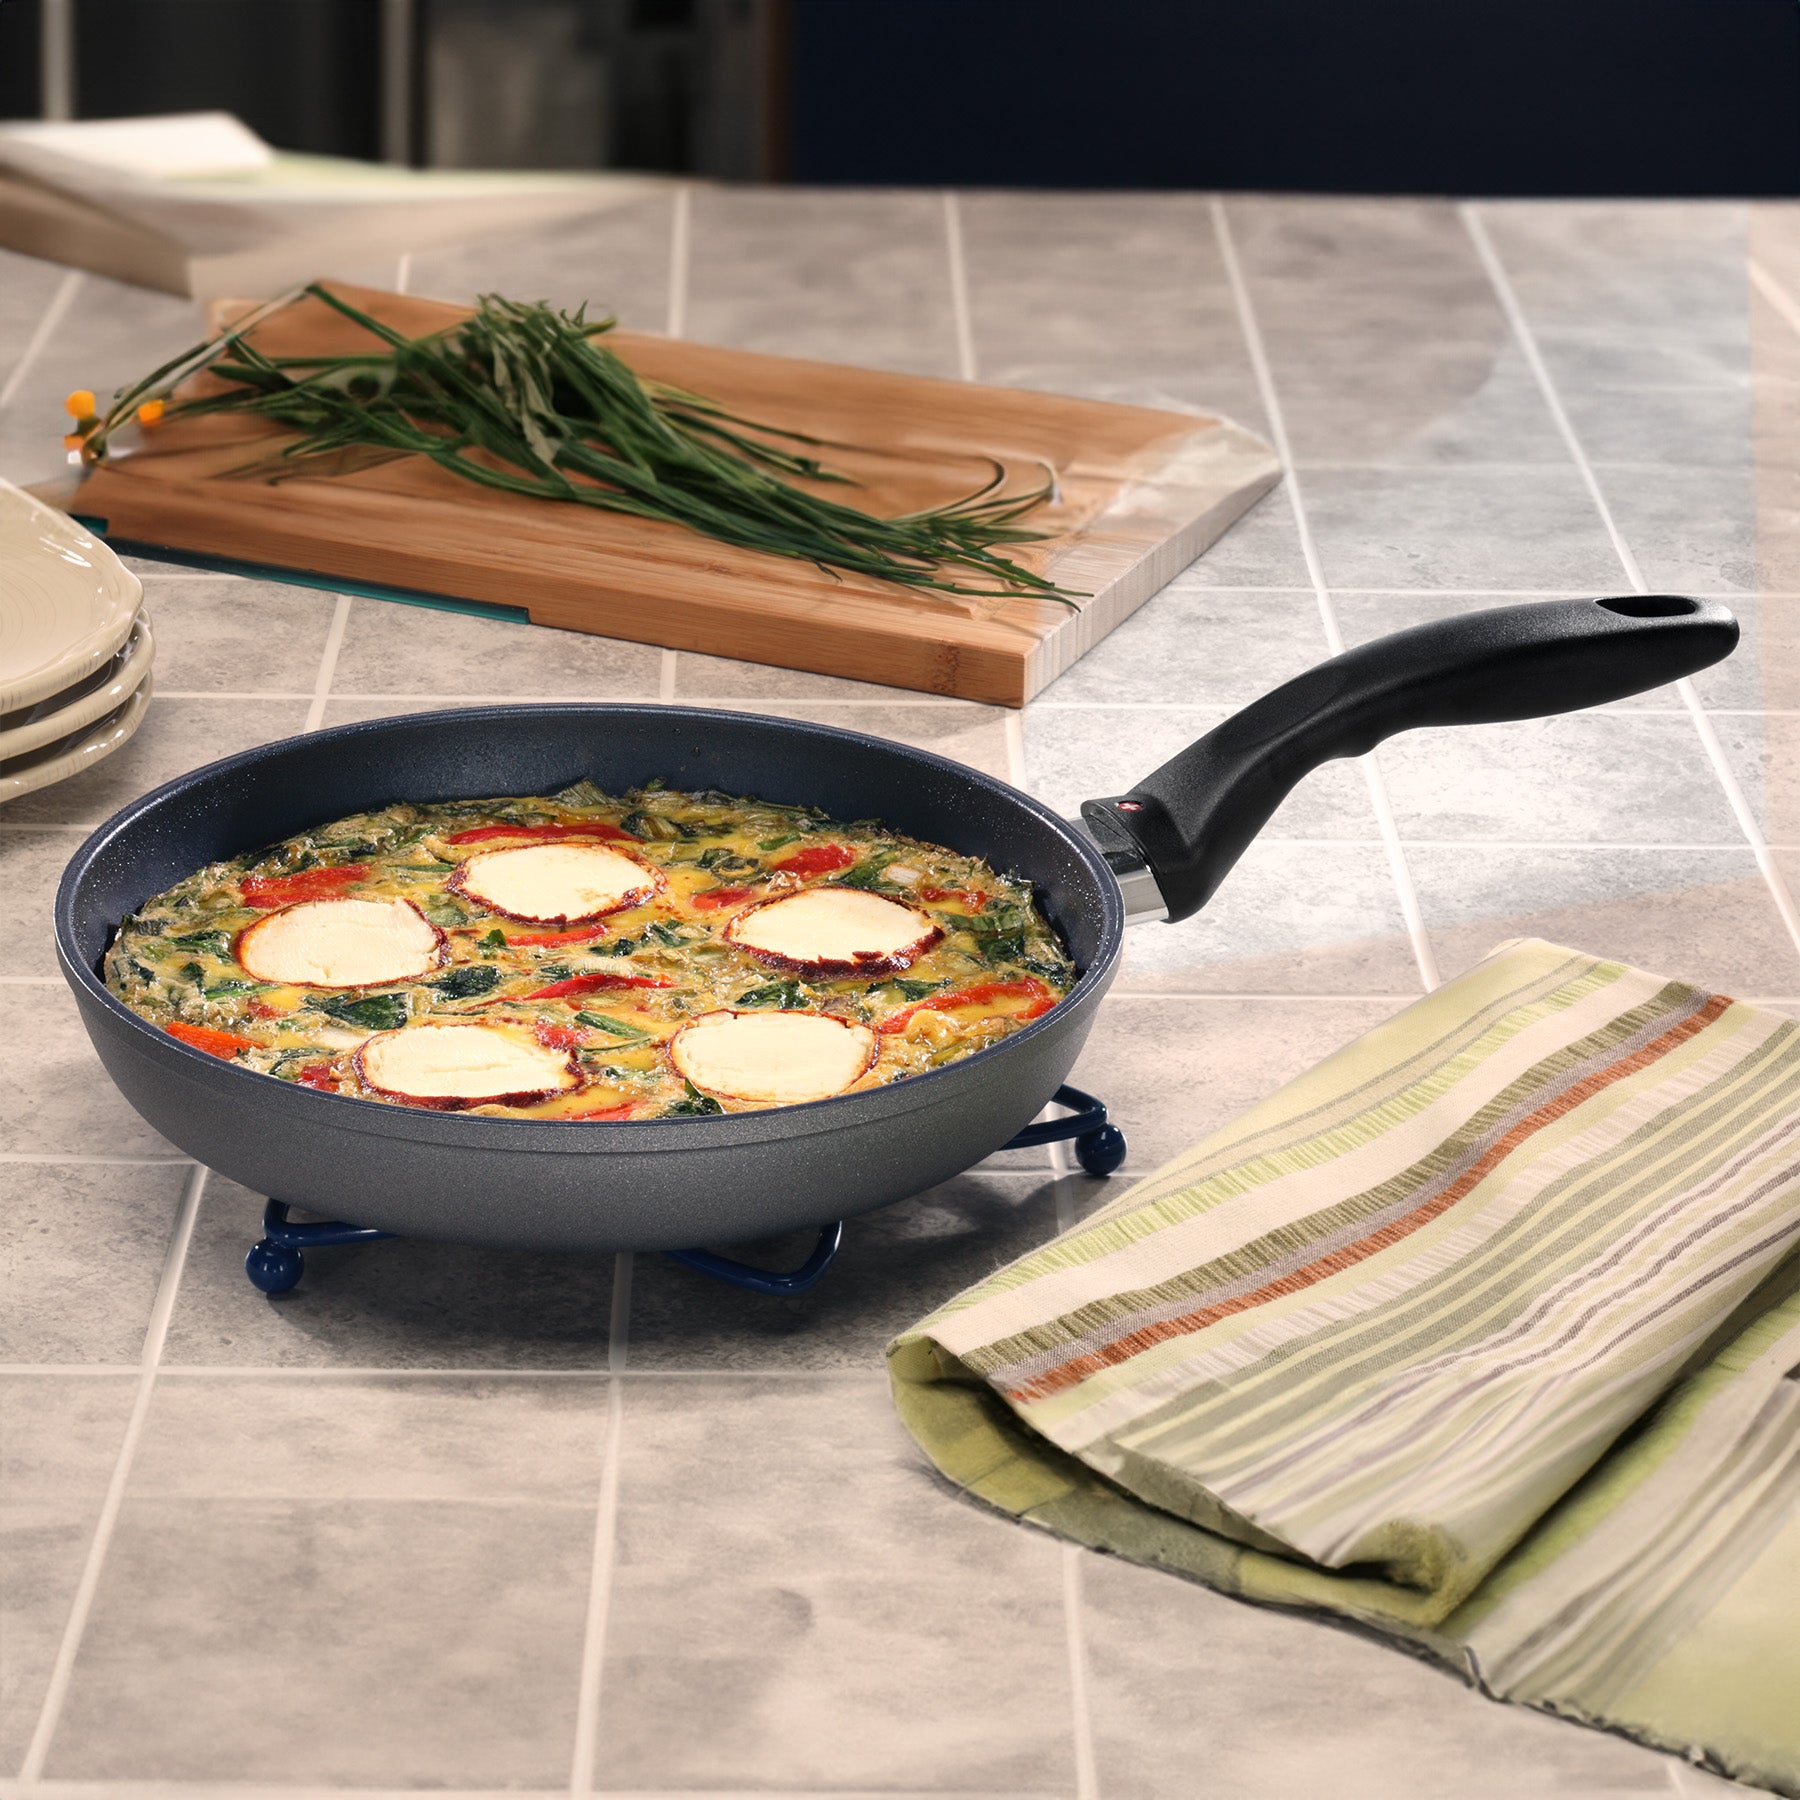 HD Nonstick Fry Pan in use on kitchen counter